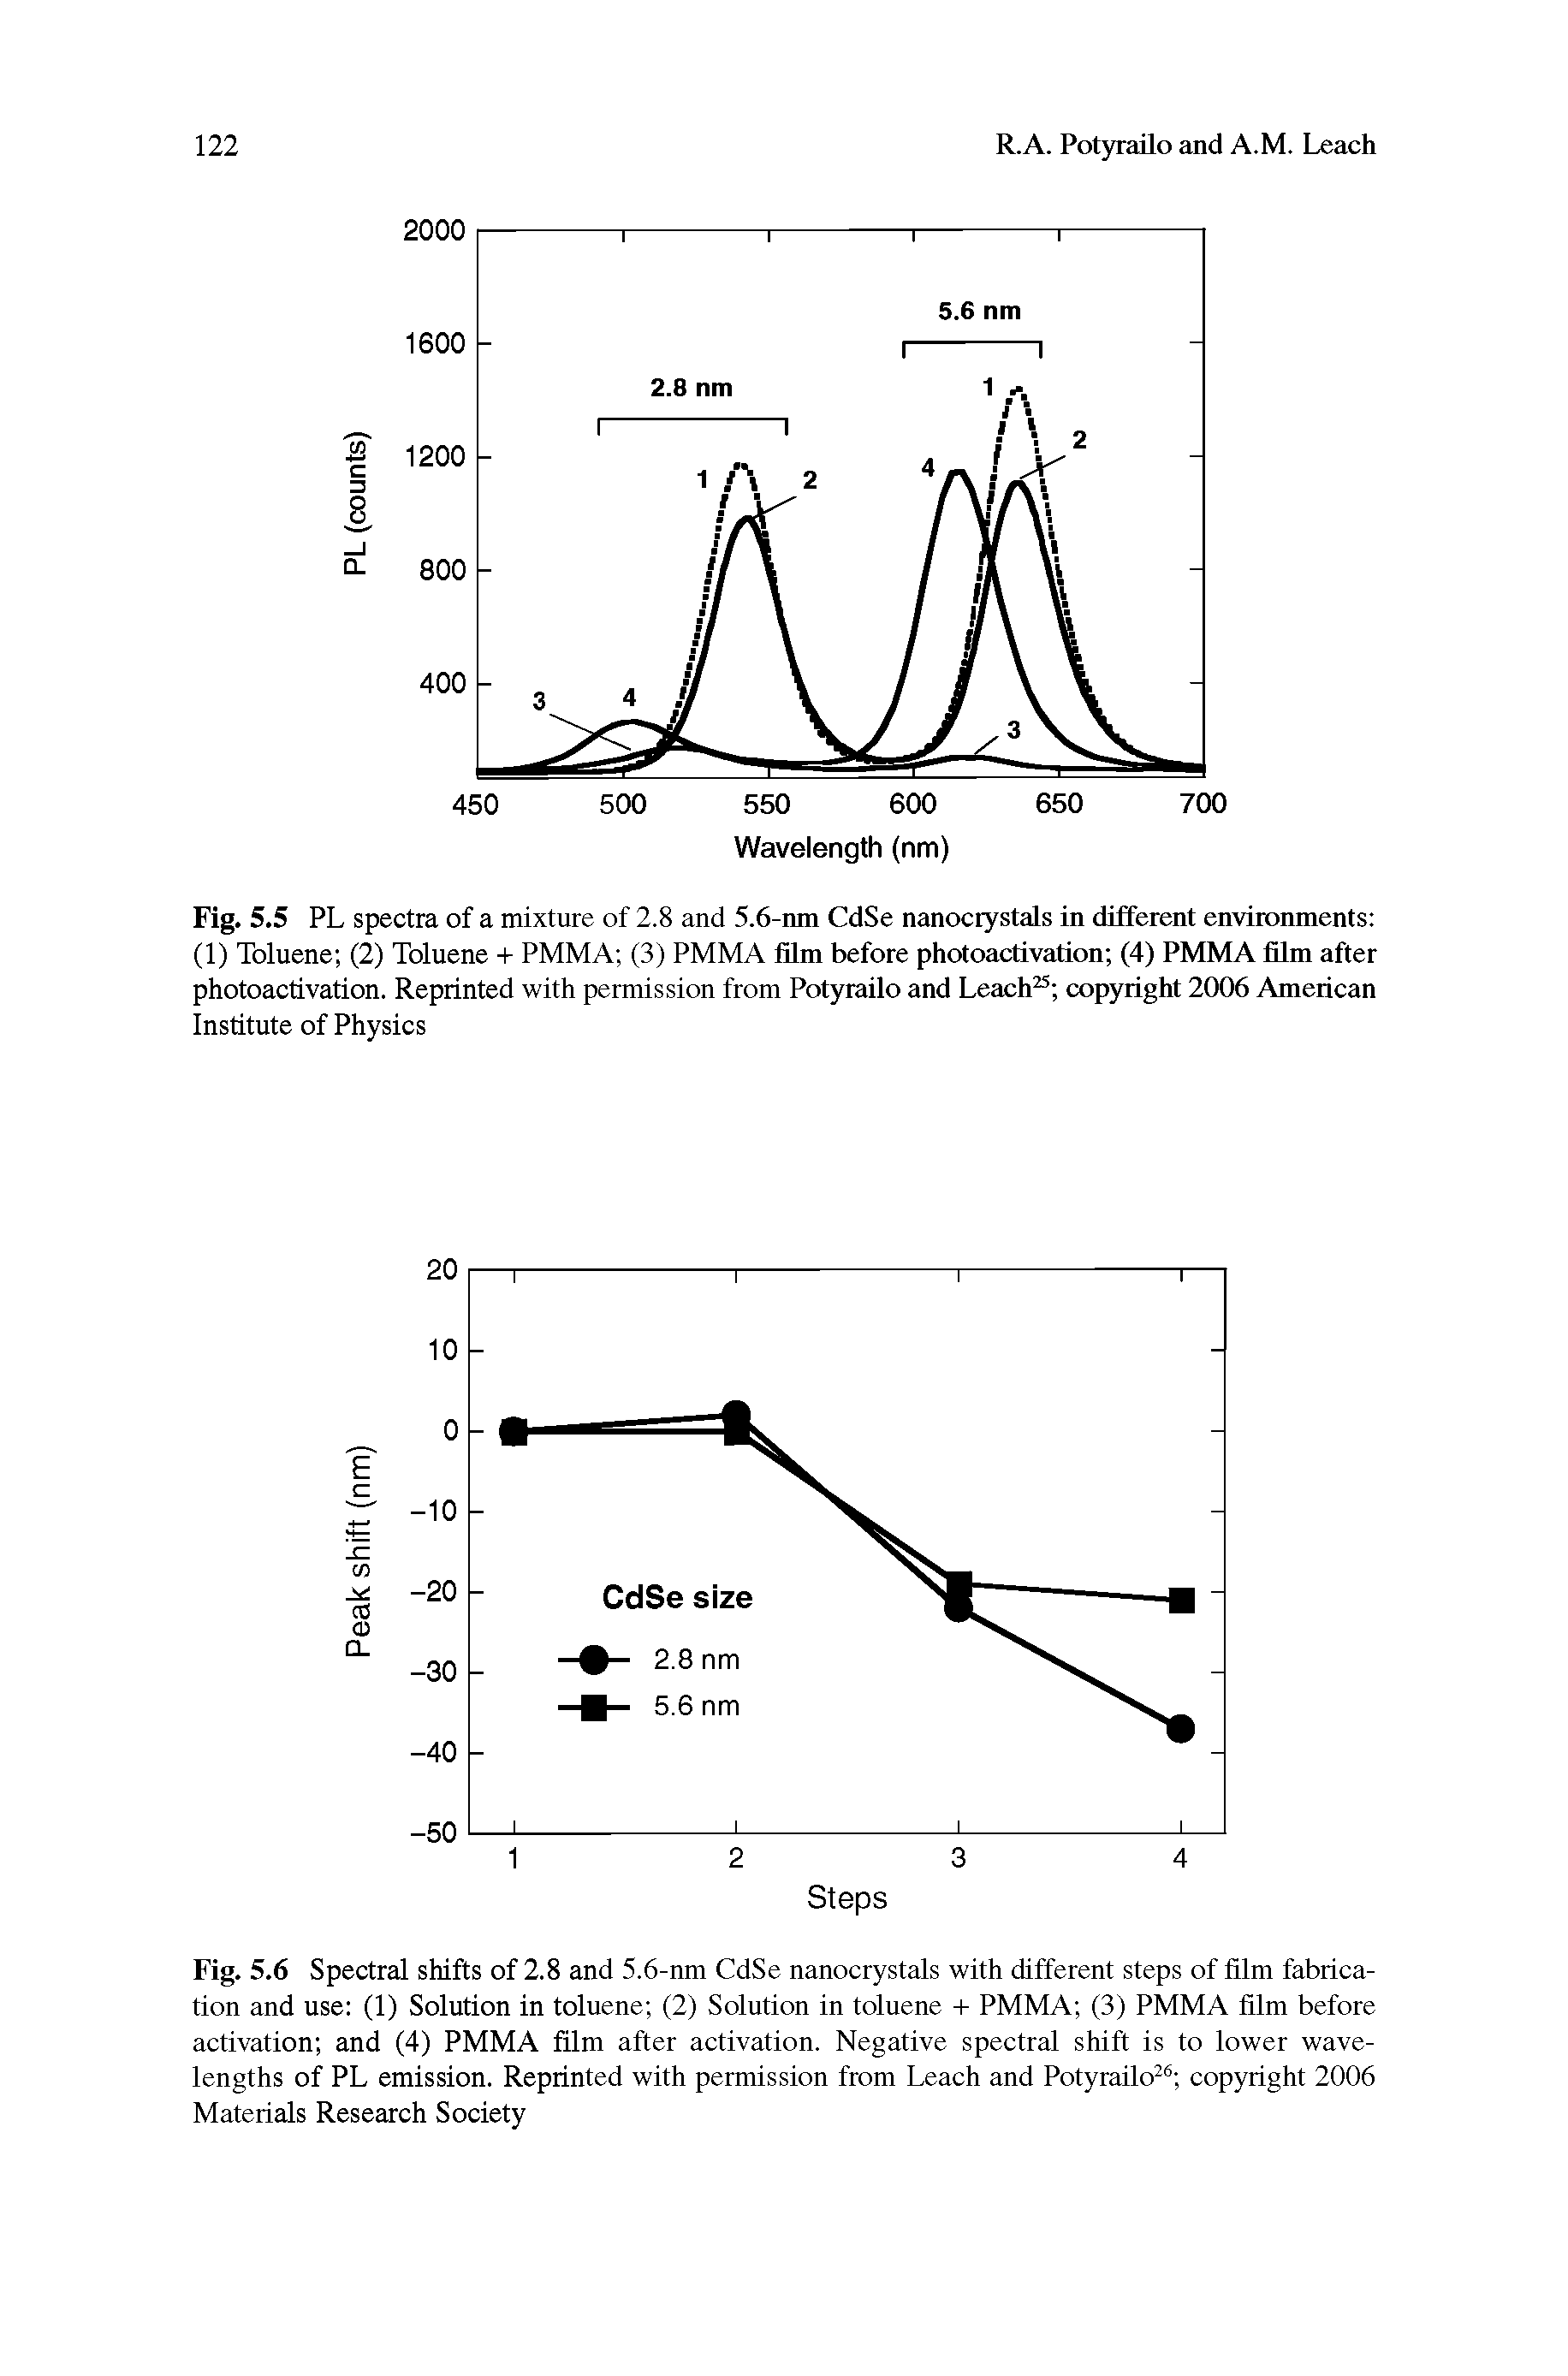 Fig. 5.6 Spectral shifts of 2.8 and 5.6-nm CdSe nanocrystals with different steps of film fabrication and use (1) Solution in toluene (2) Solution in toluene + PMMA (3) PMMA film before activation and (4) PMMA film after activation. Negative spectral shift is to lower wavelengths of PL emission. Reprinted with permission from Leach and Potyrailo26 copyright 2006 Materials Research Society...